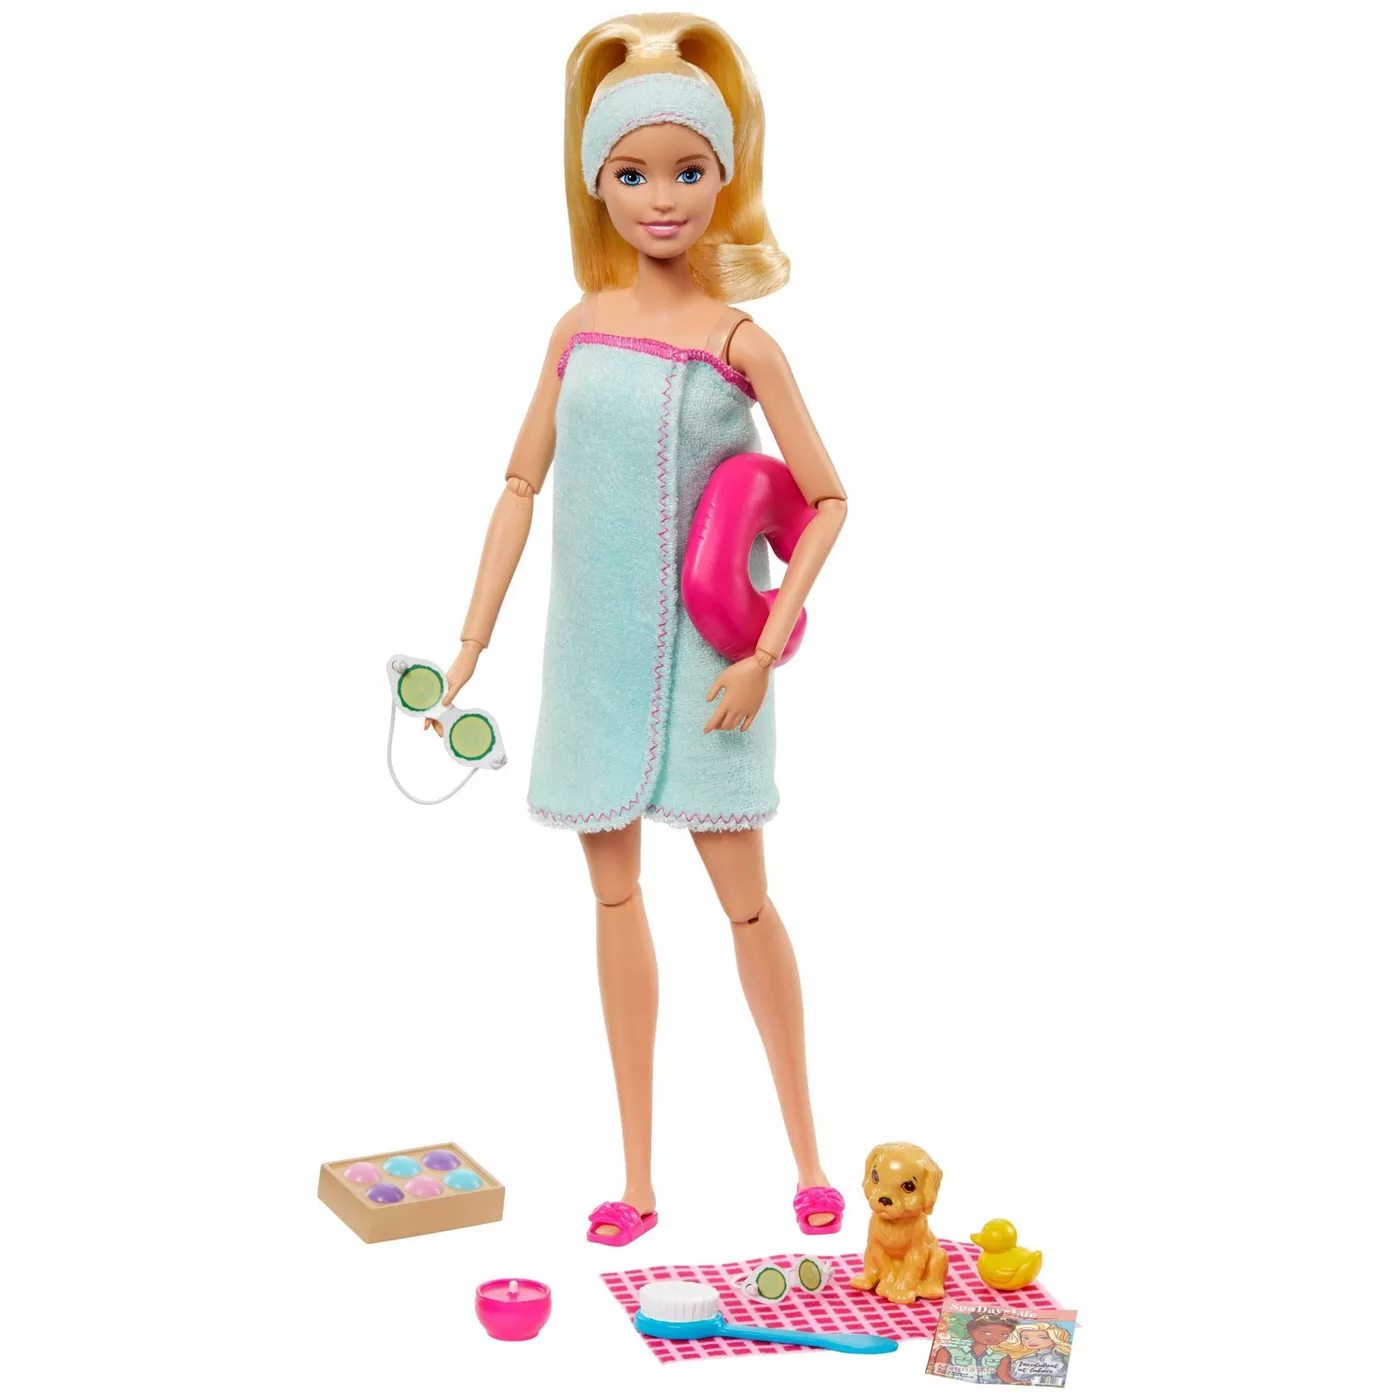 Barbie Spa Day Doll - Spa - image 1 of 6